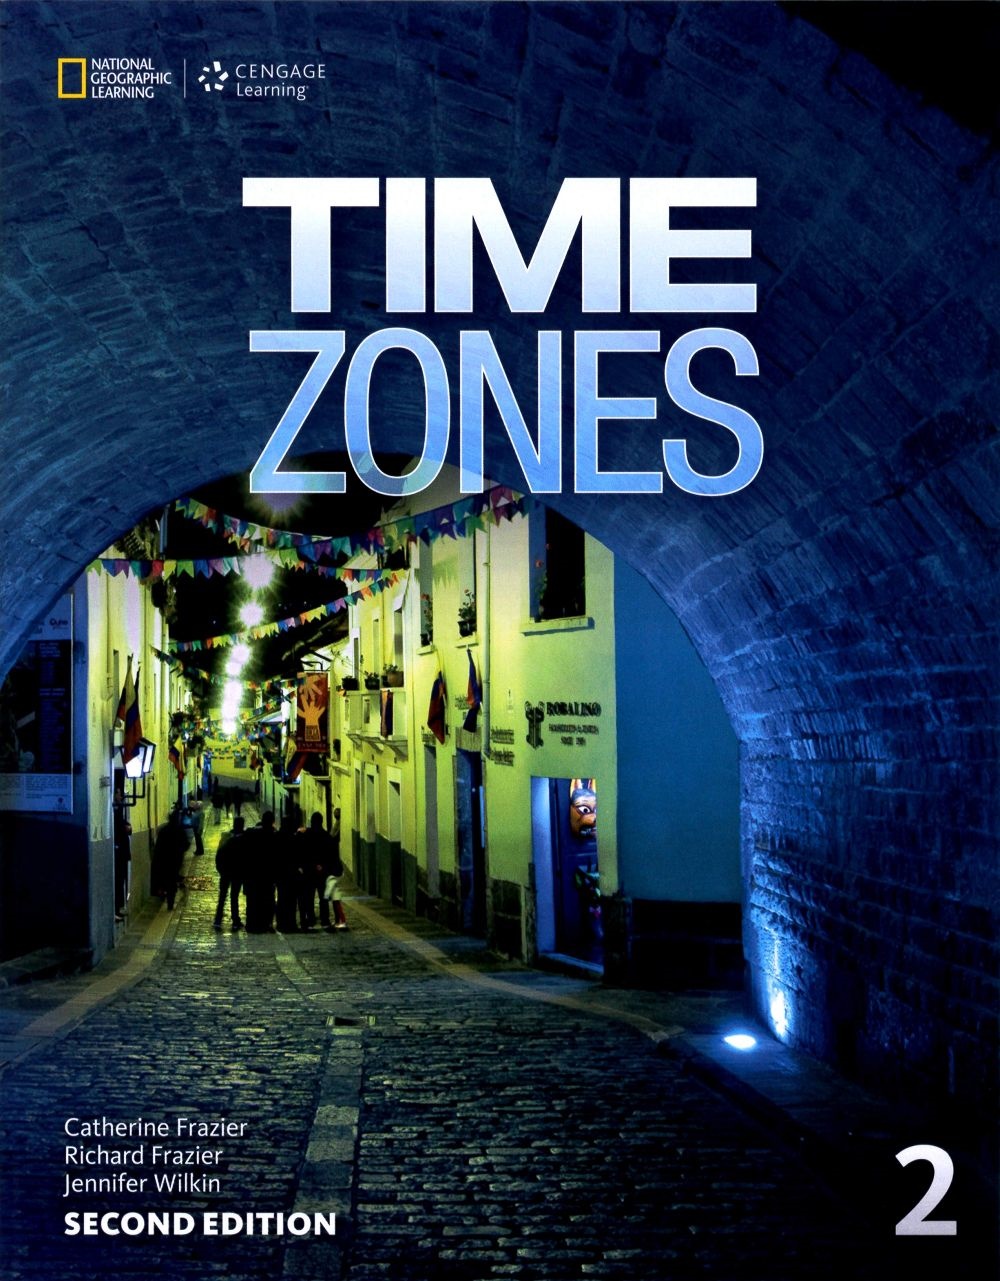 Time Zones 2/e (2) with Online Workbook